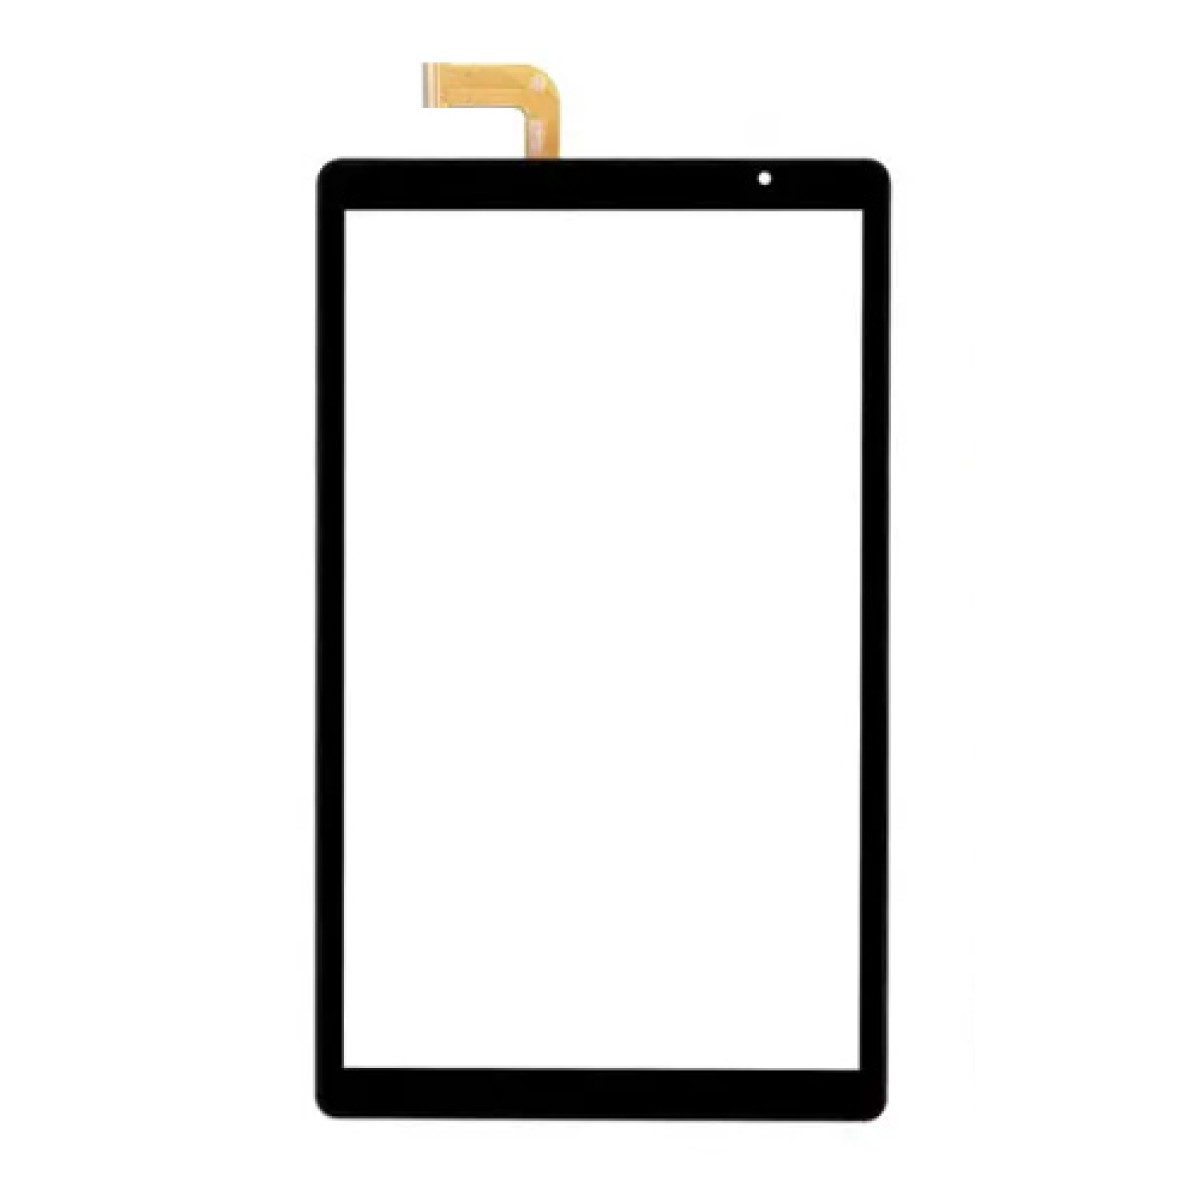 TECLAST ανταλλακτικό Touch Panel & Front Cover για tablet P25T, 51 pin